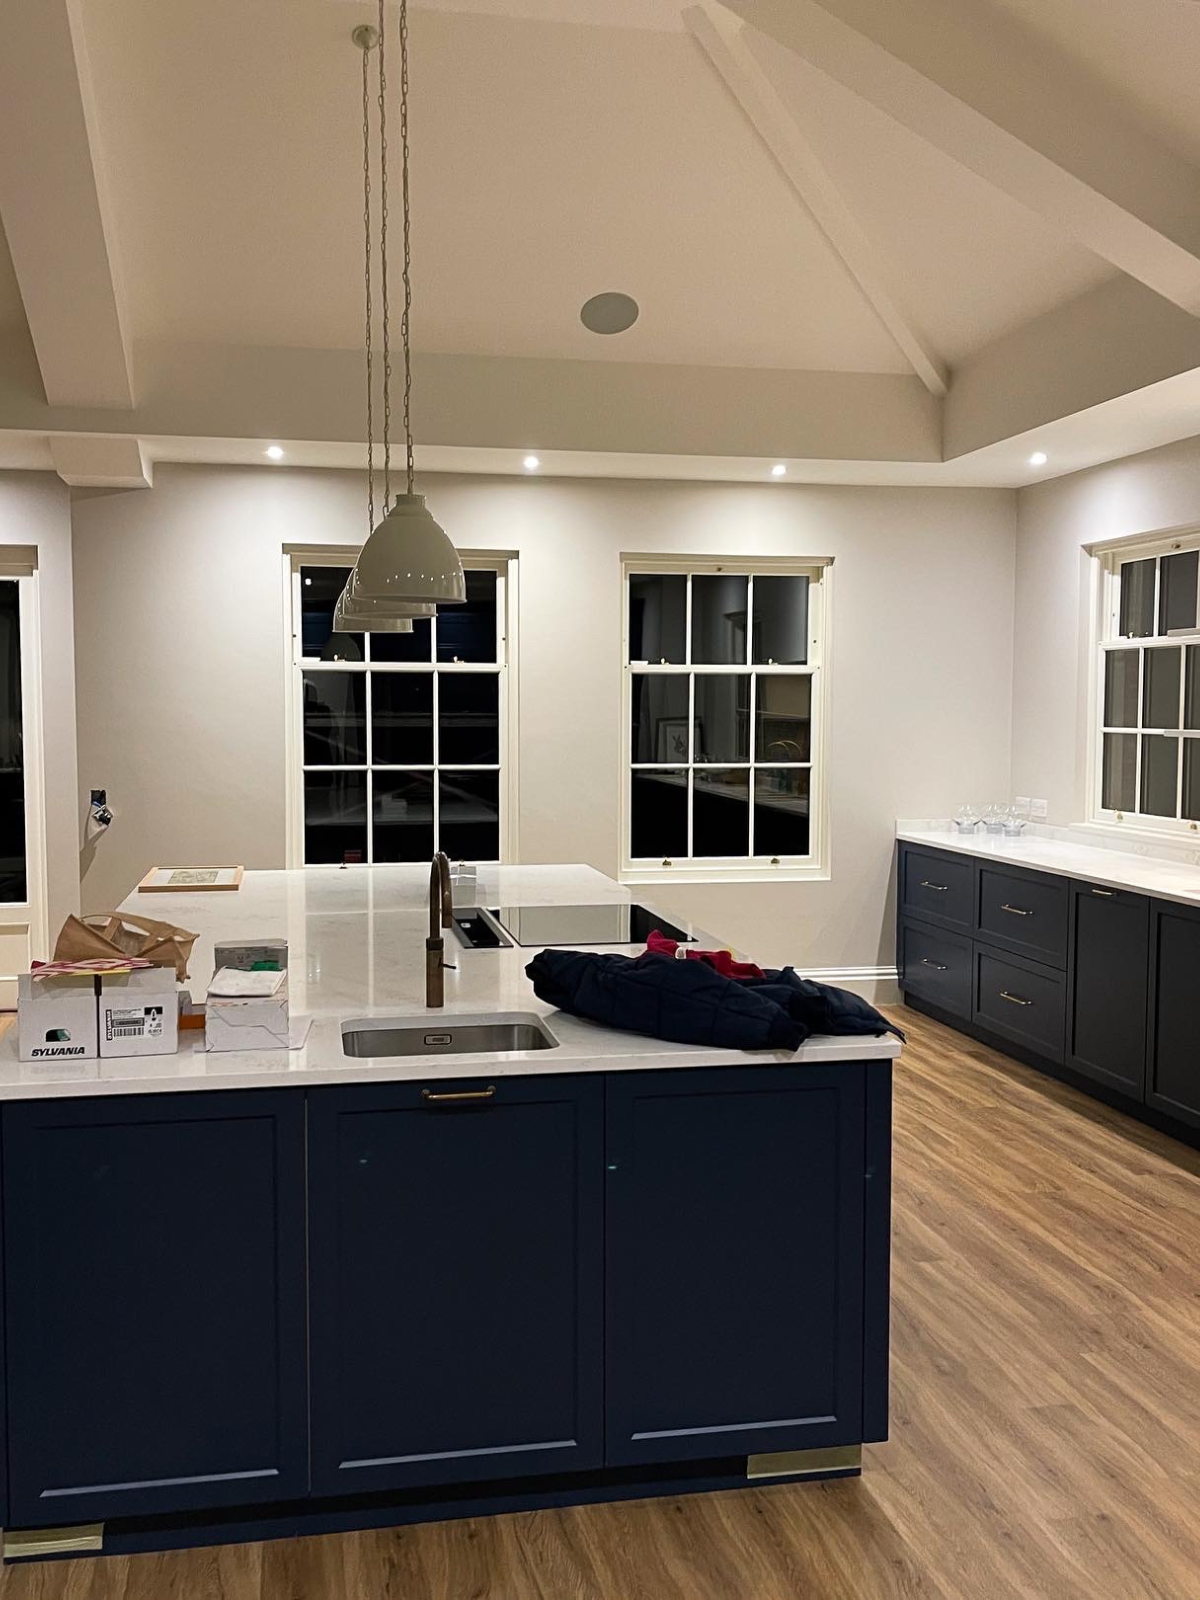 Kitchen with navy blue island, pendant lighting and in-ceiling speakers